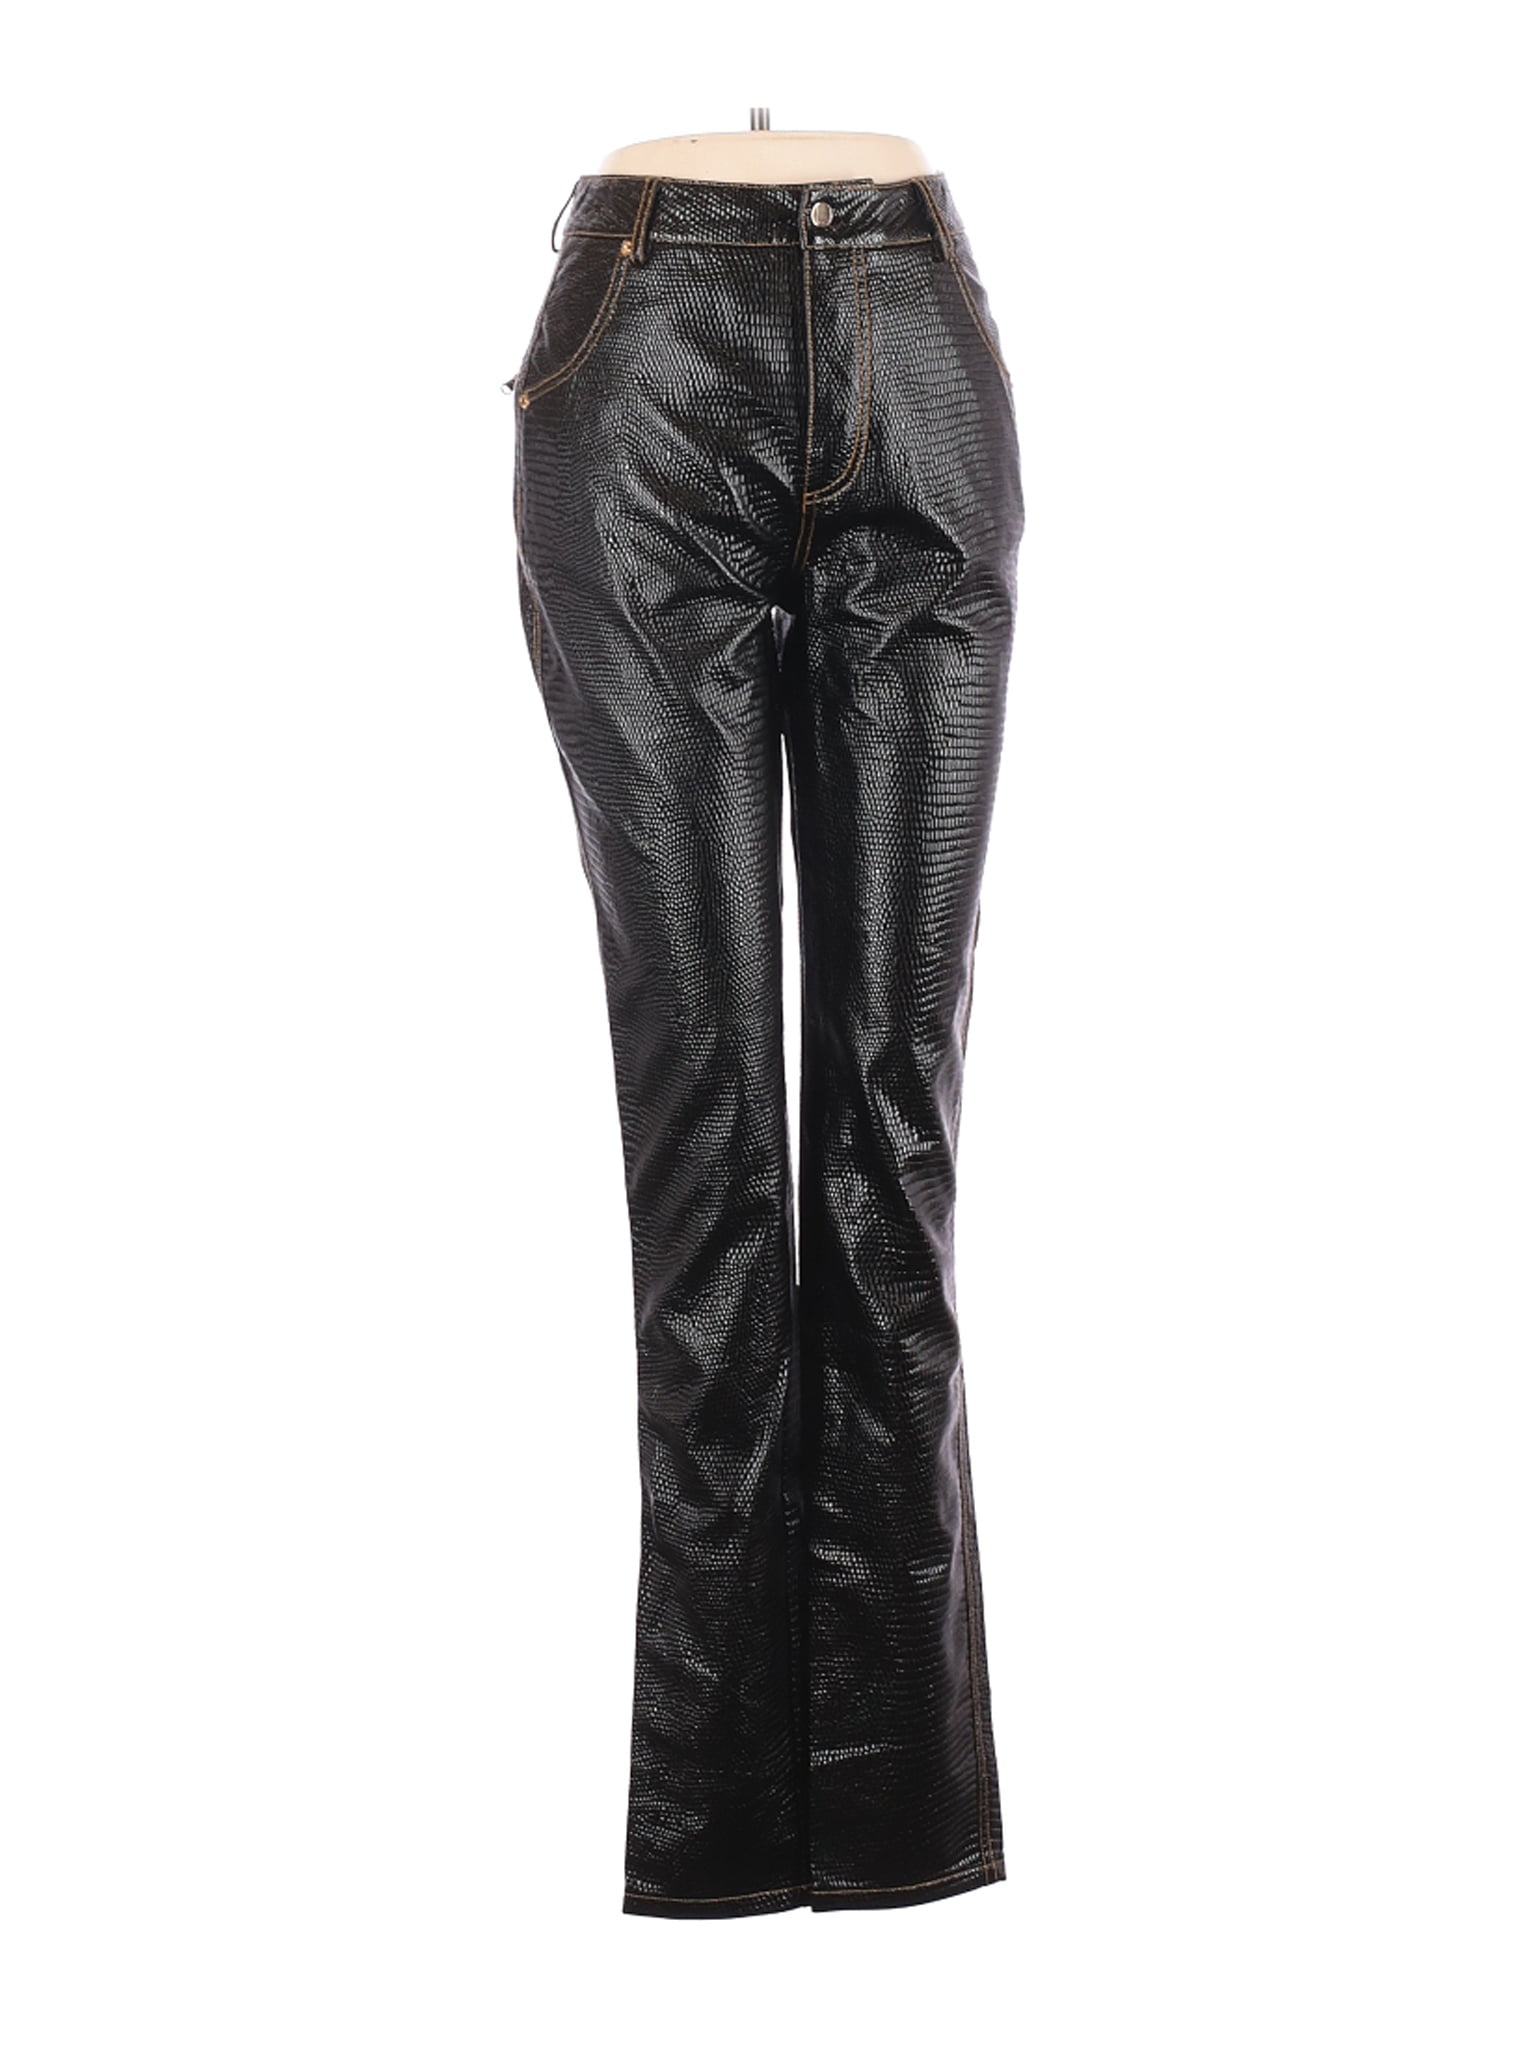 Tiger Mist - Pre-Owned Tiger Mist Women's Size S Faux Leather Pants ...